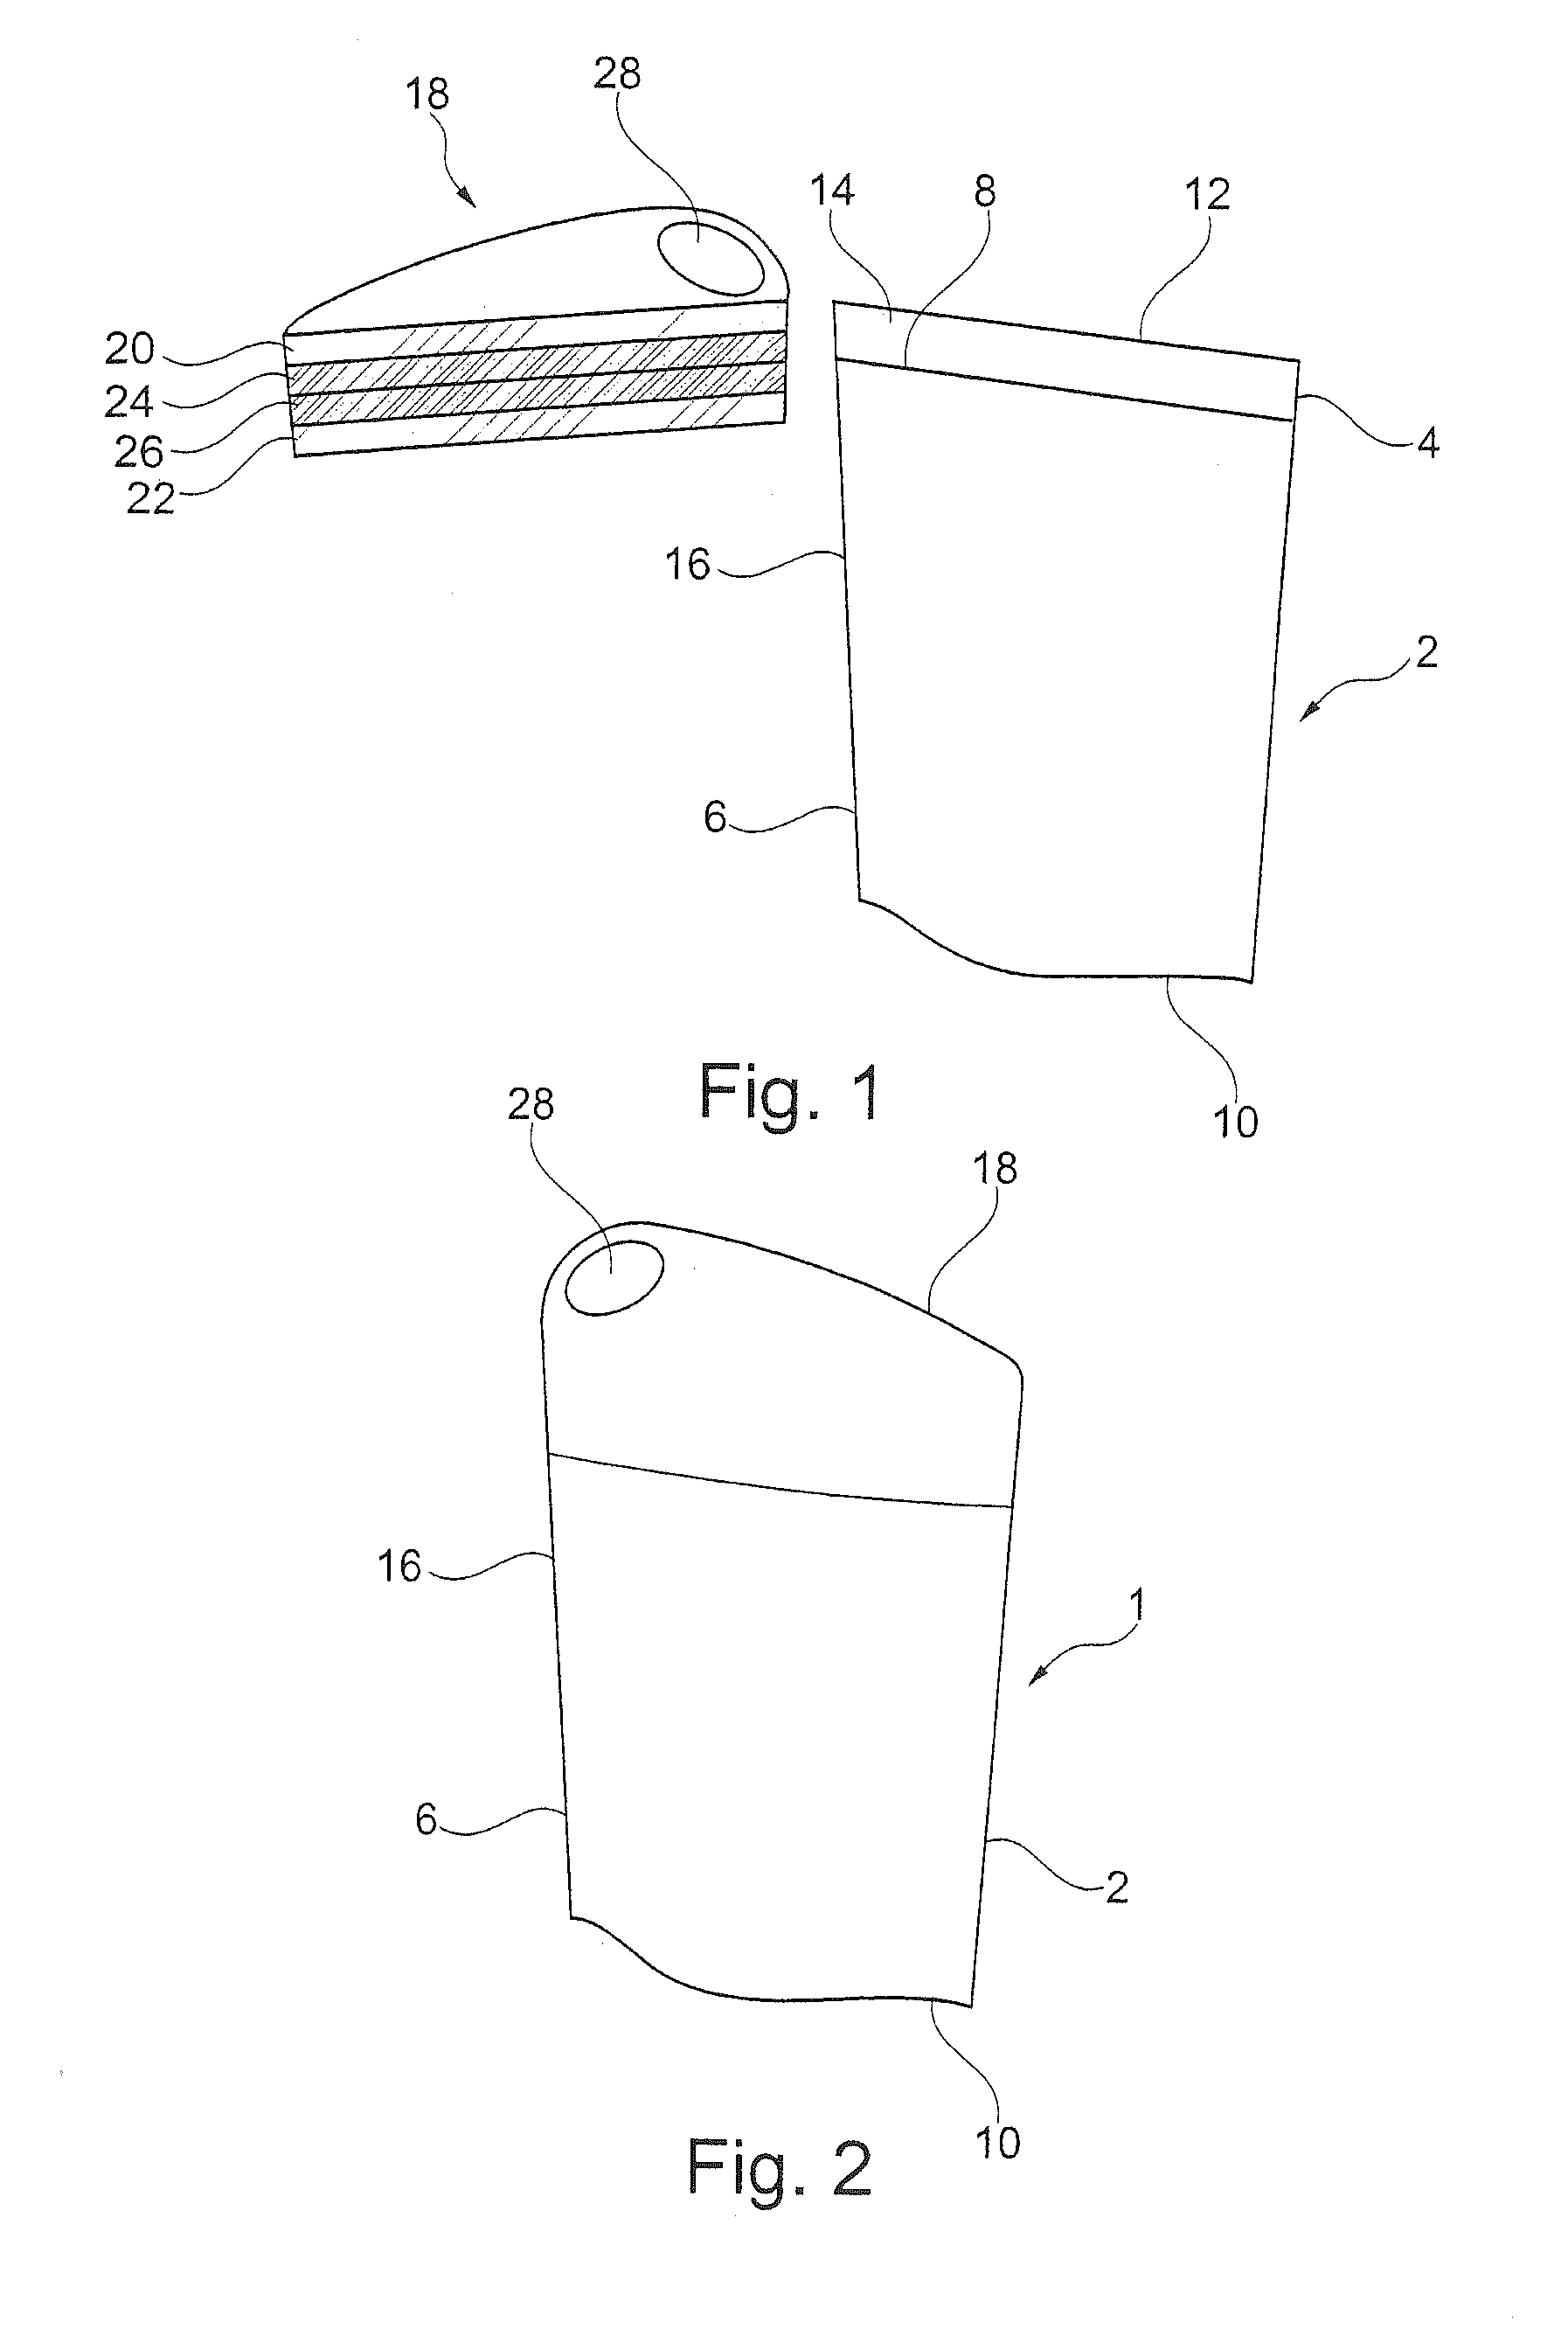 Resealable package, method for producing the resealable package and apparatus for producing the resealable package